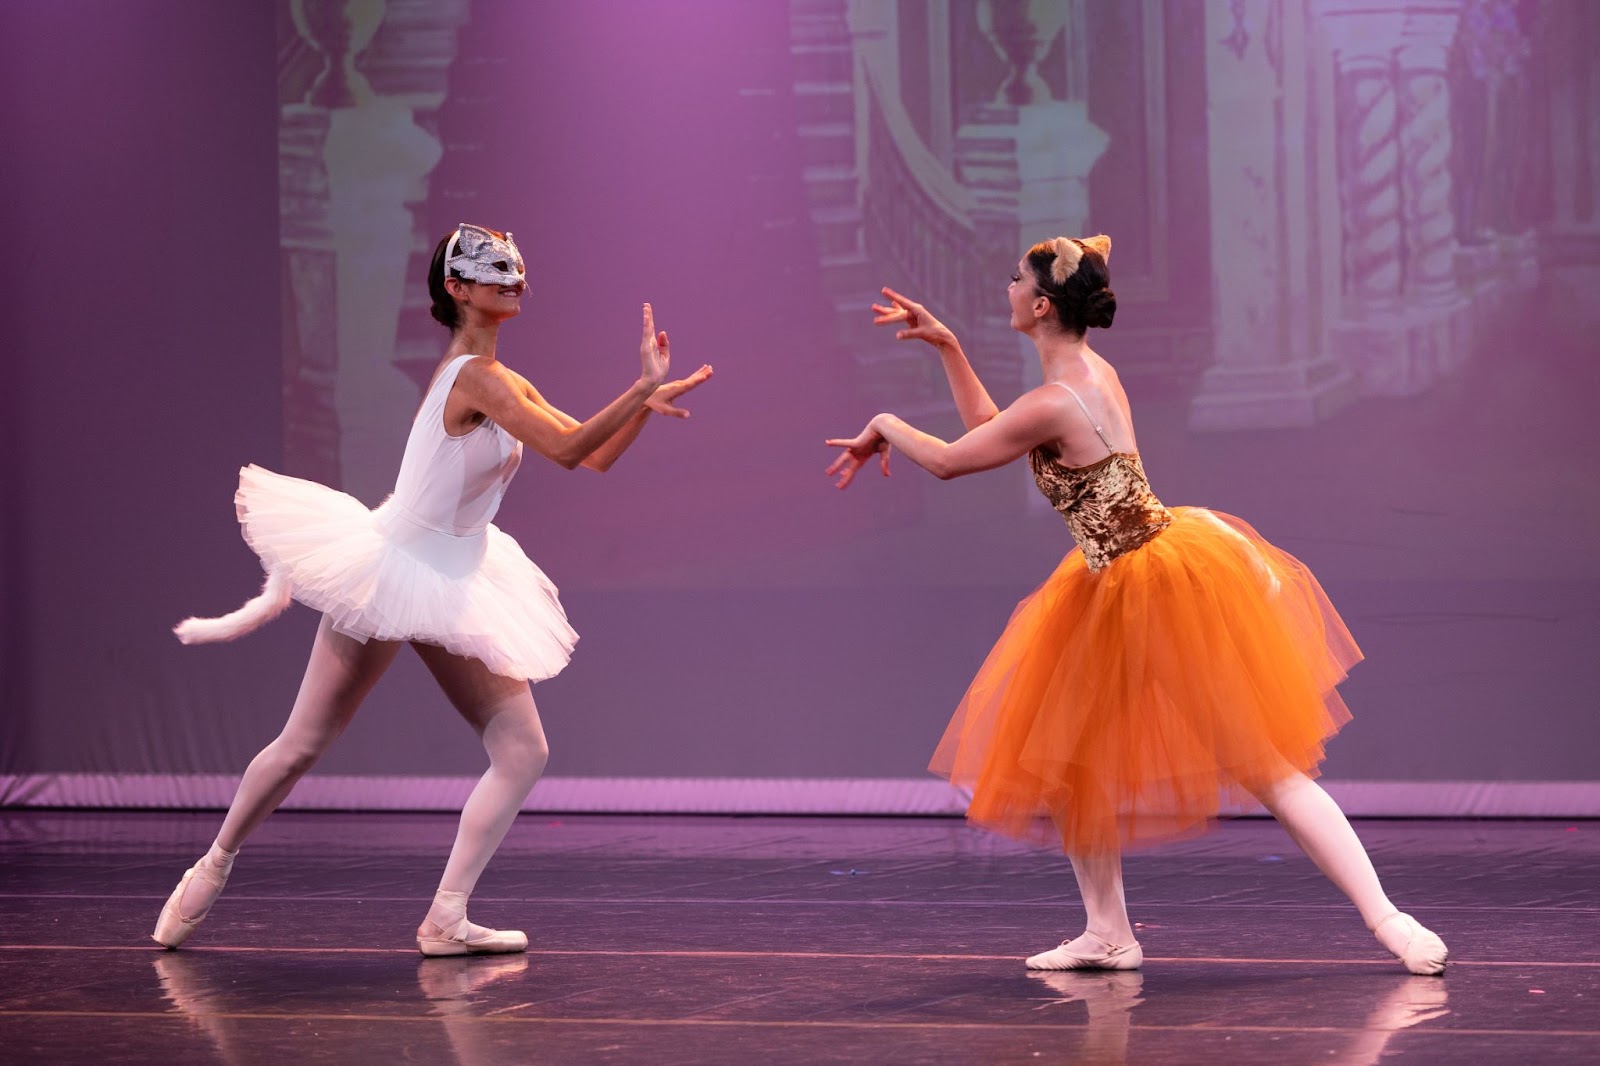 Two female ballet dancers make pawing gestures at each other: the one on the left is in a white tutu and wears a silver cat mask, while the one on the right wears an orange skirt and cat ears.